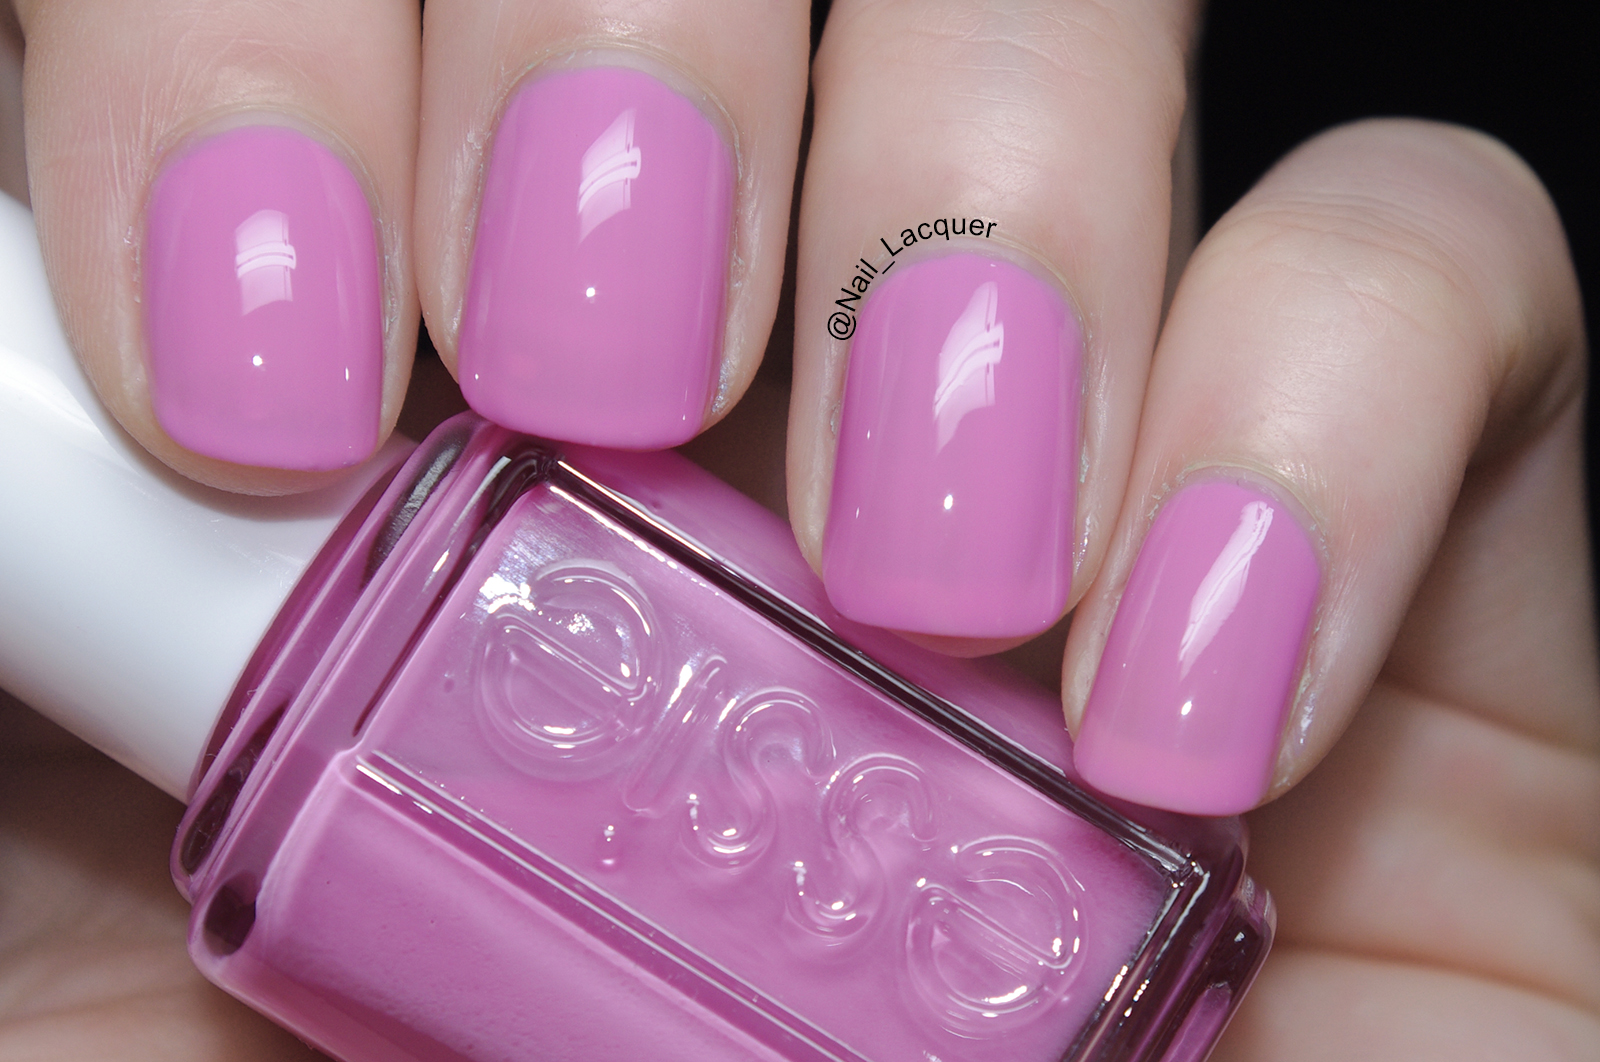 2. Essie Nail Polish in "A Touch of Color" - wide 7